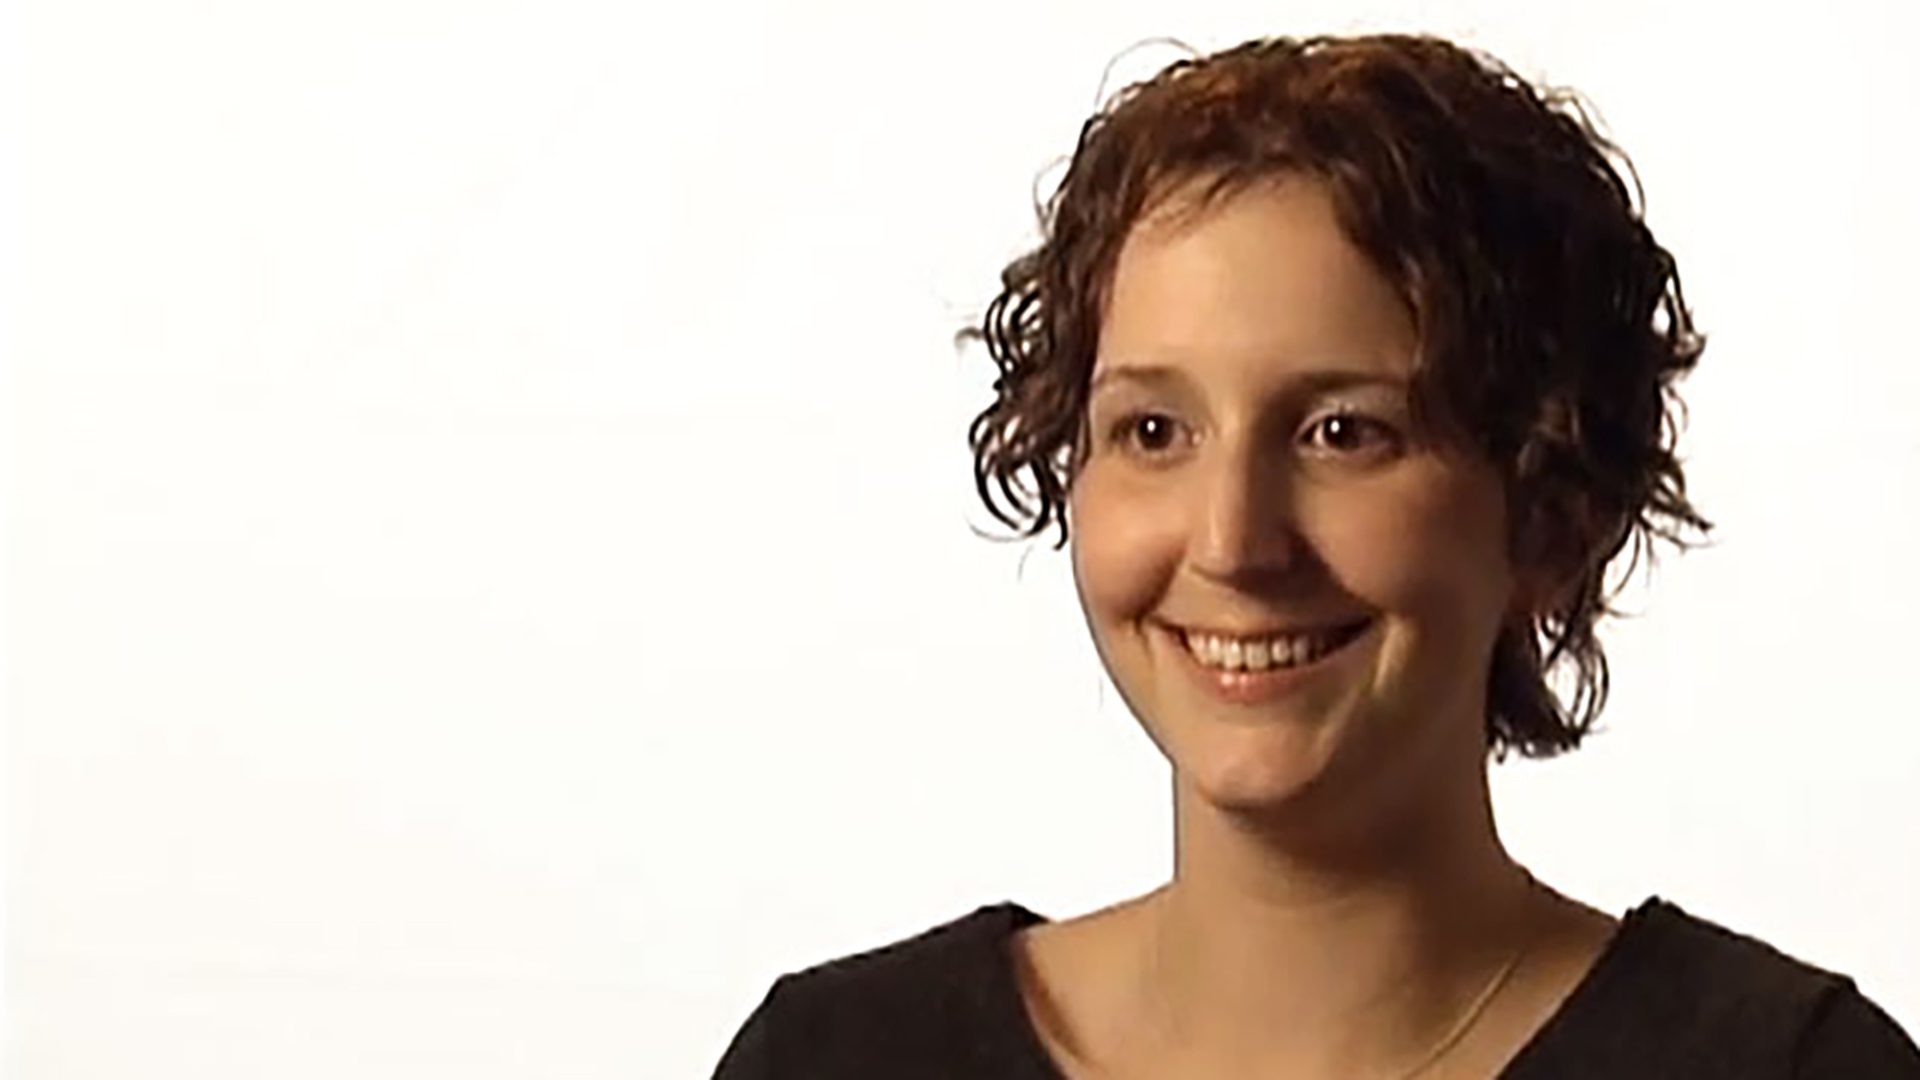 A young woman with short curly hair wears a black shirt and is interviewed against a white background.